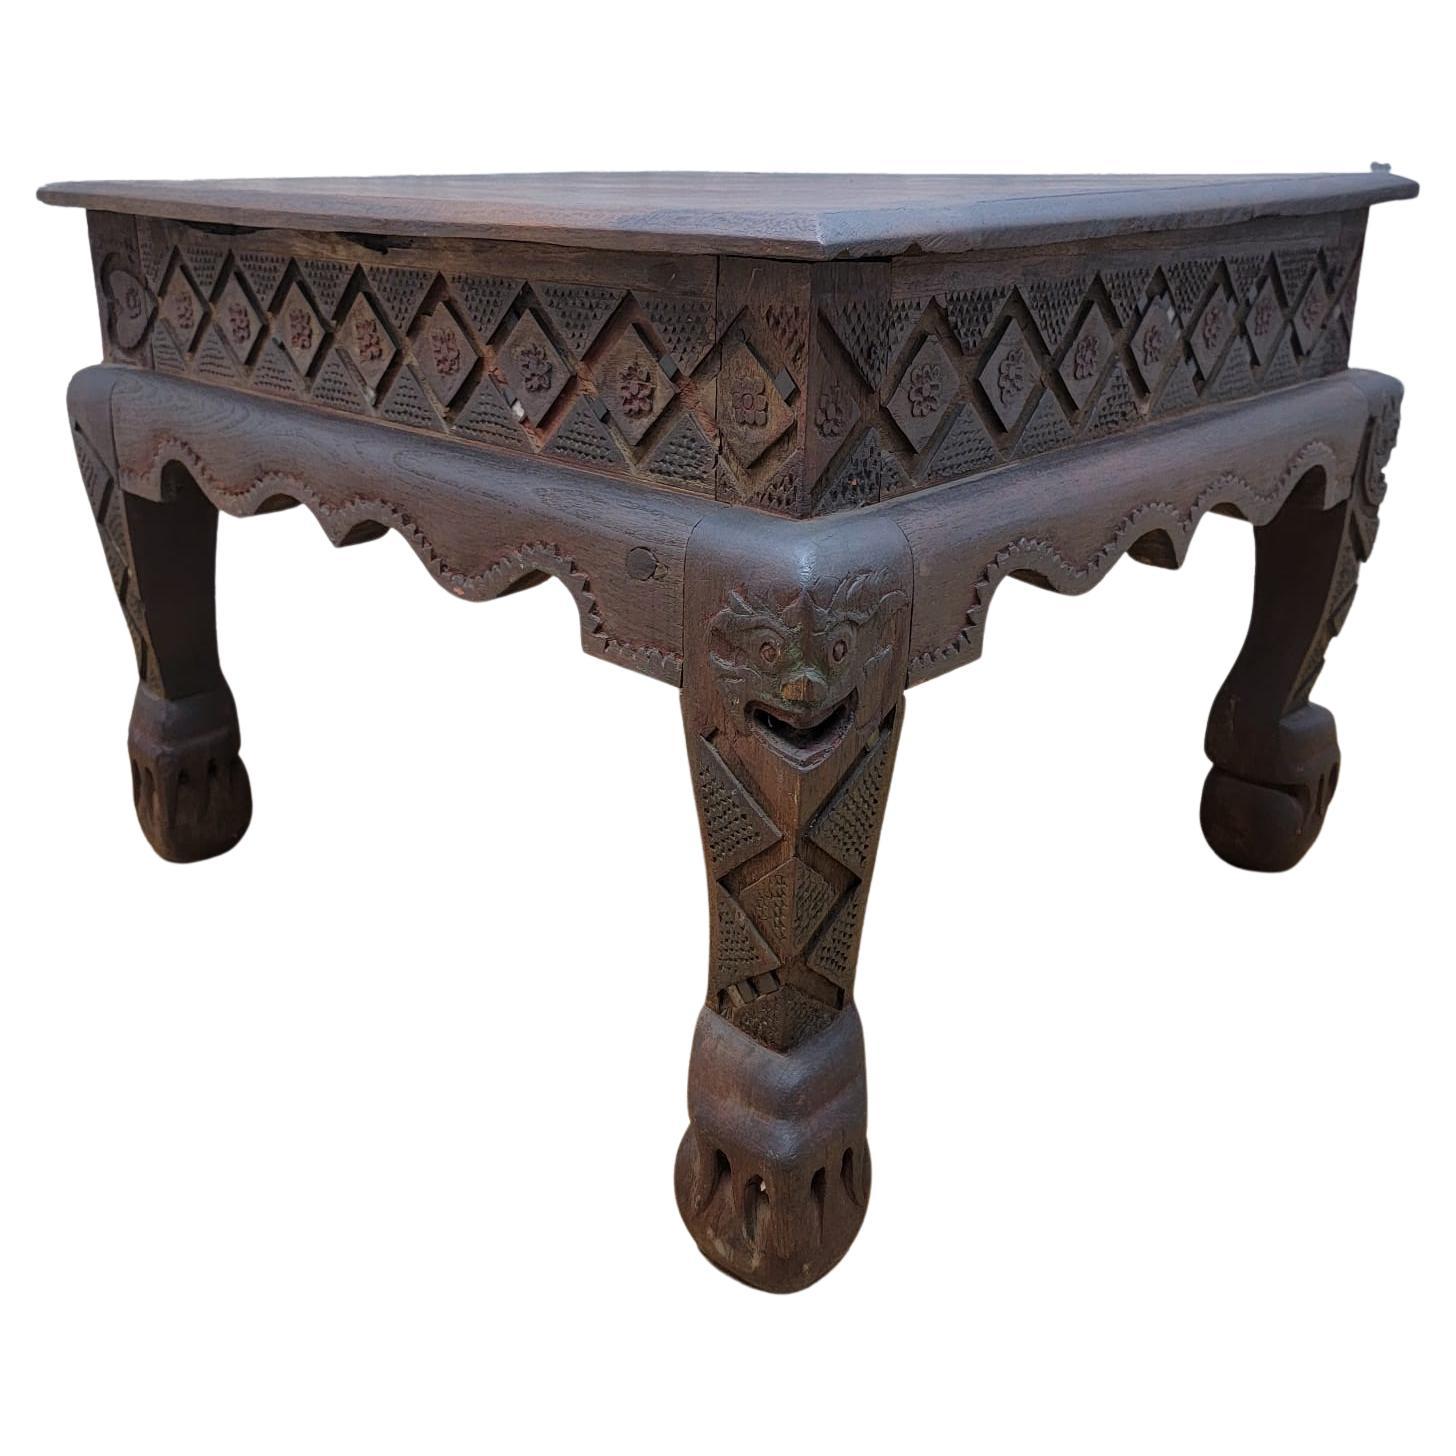 Antique East Indian Teak Wood Square Side Table with Carved Legs and Apron For Sale